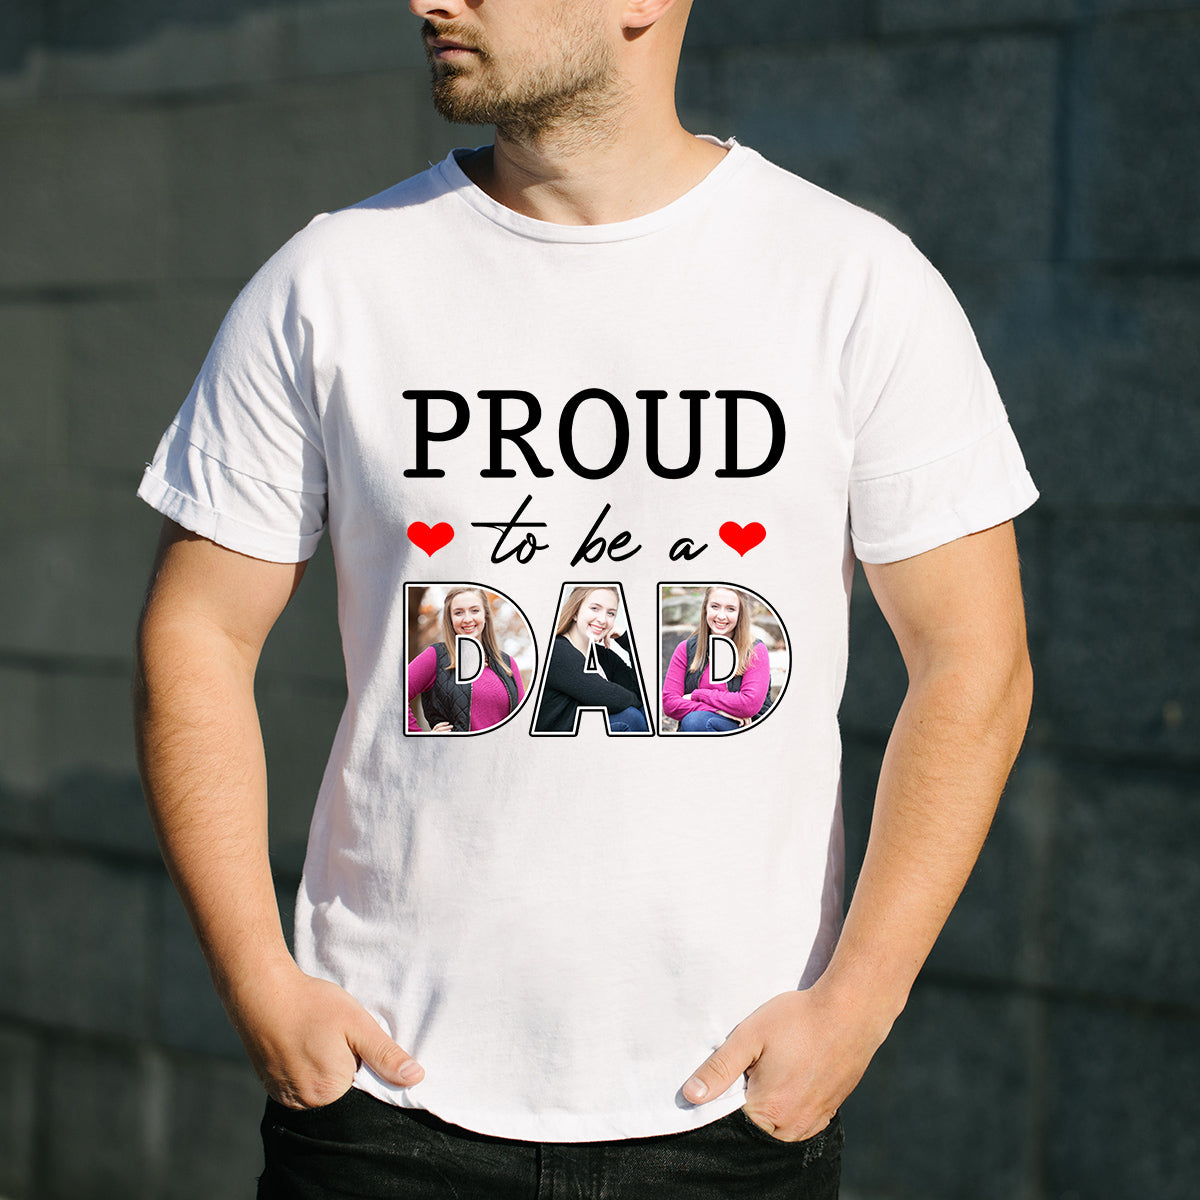 Custom Personalized Photo Daddy T Shirts Printing Gift with pictures on Father's day, birthday gift for world's best dad from daughter son - Proud To Be A Mom/Dad - PersonalizedWitch